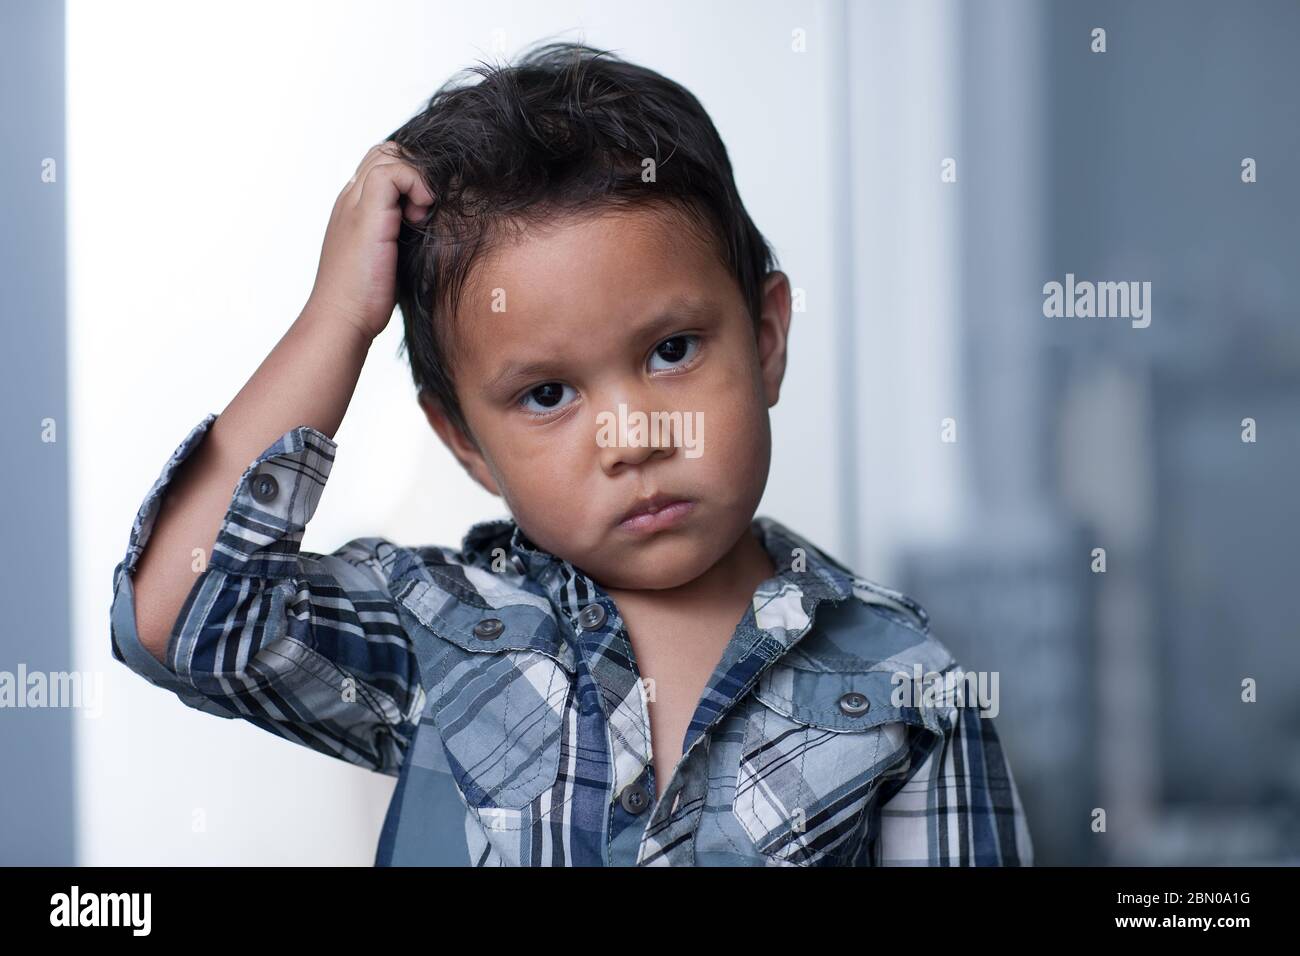 A child exibiting a mood disorder or depressed irritability, expressing sadness and pulling of his hair. Stock Photo